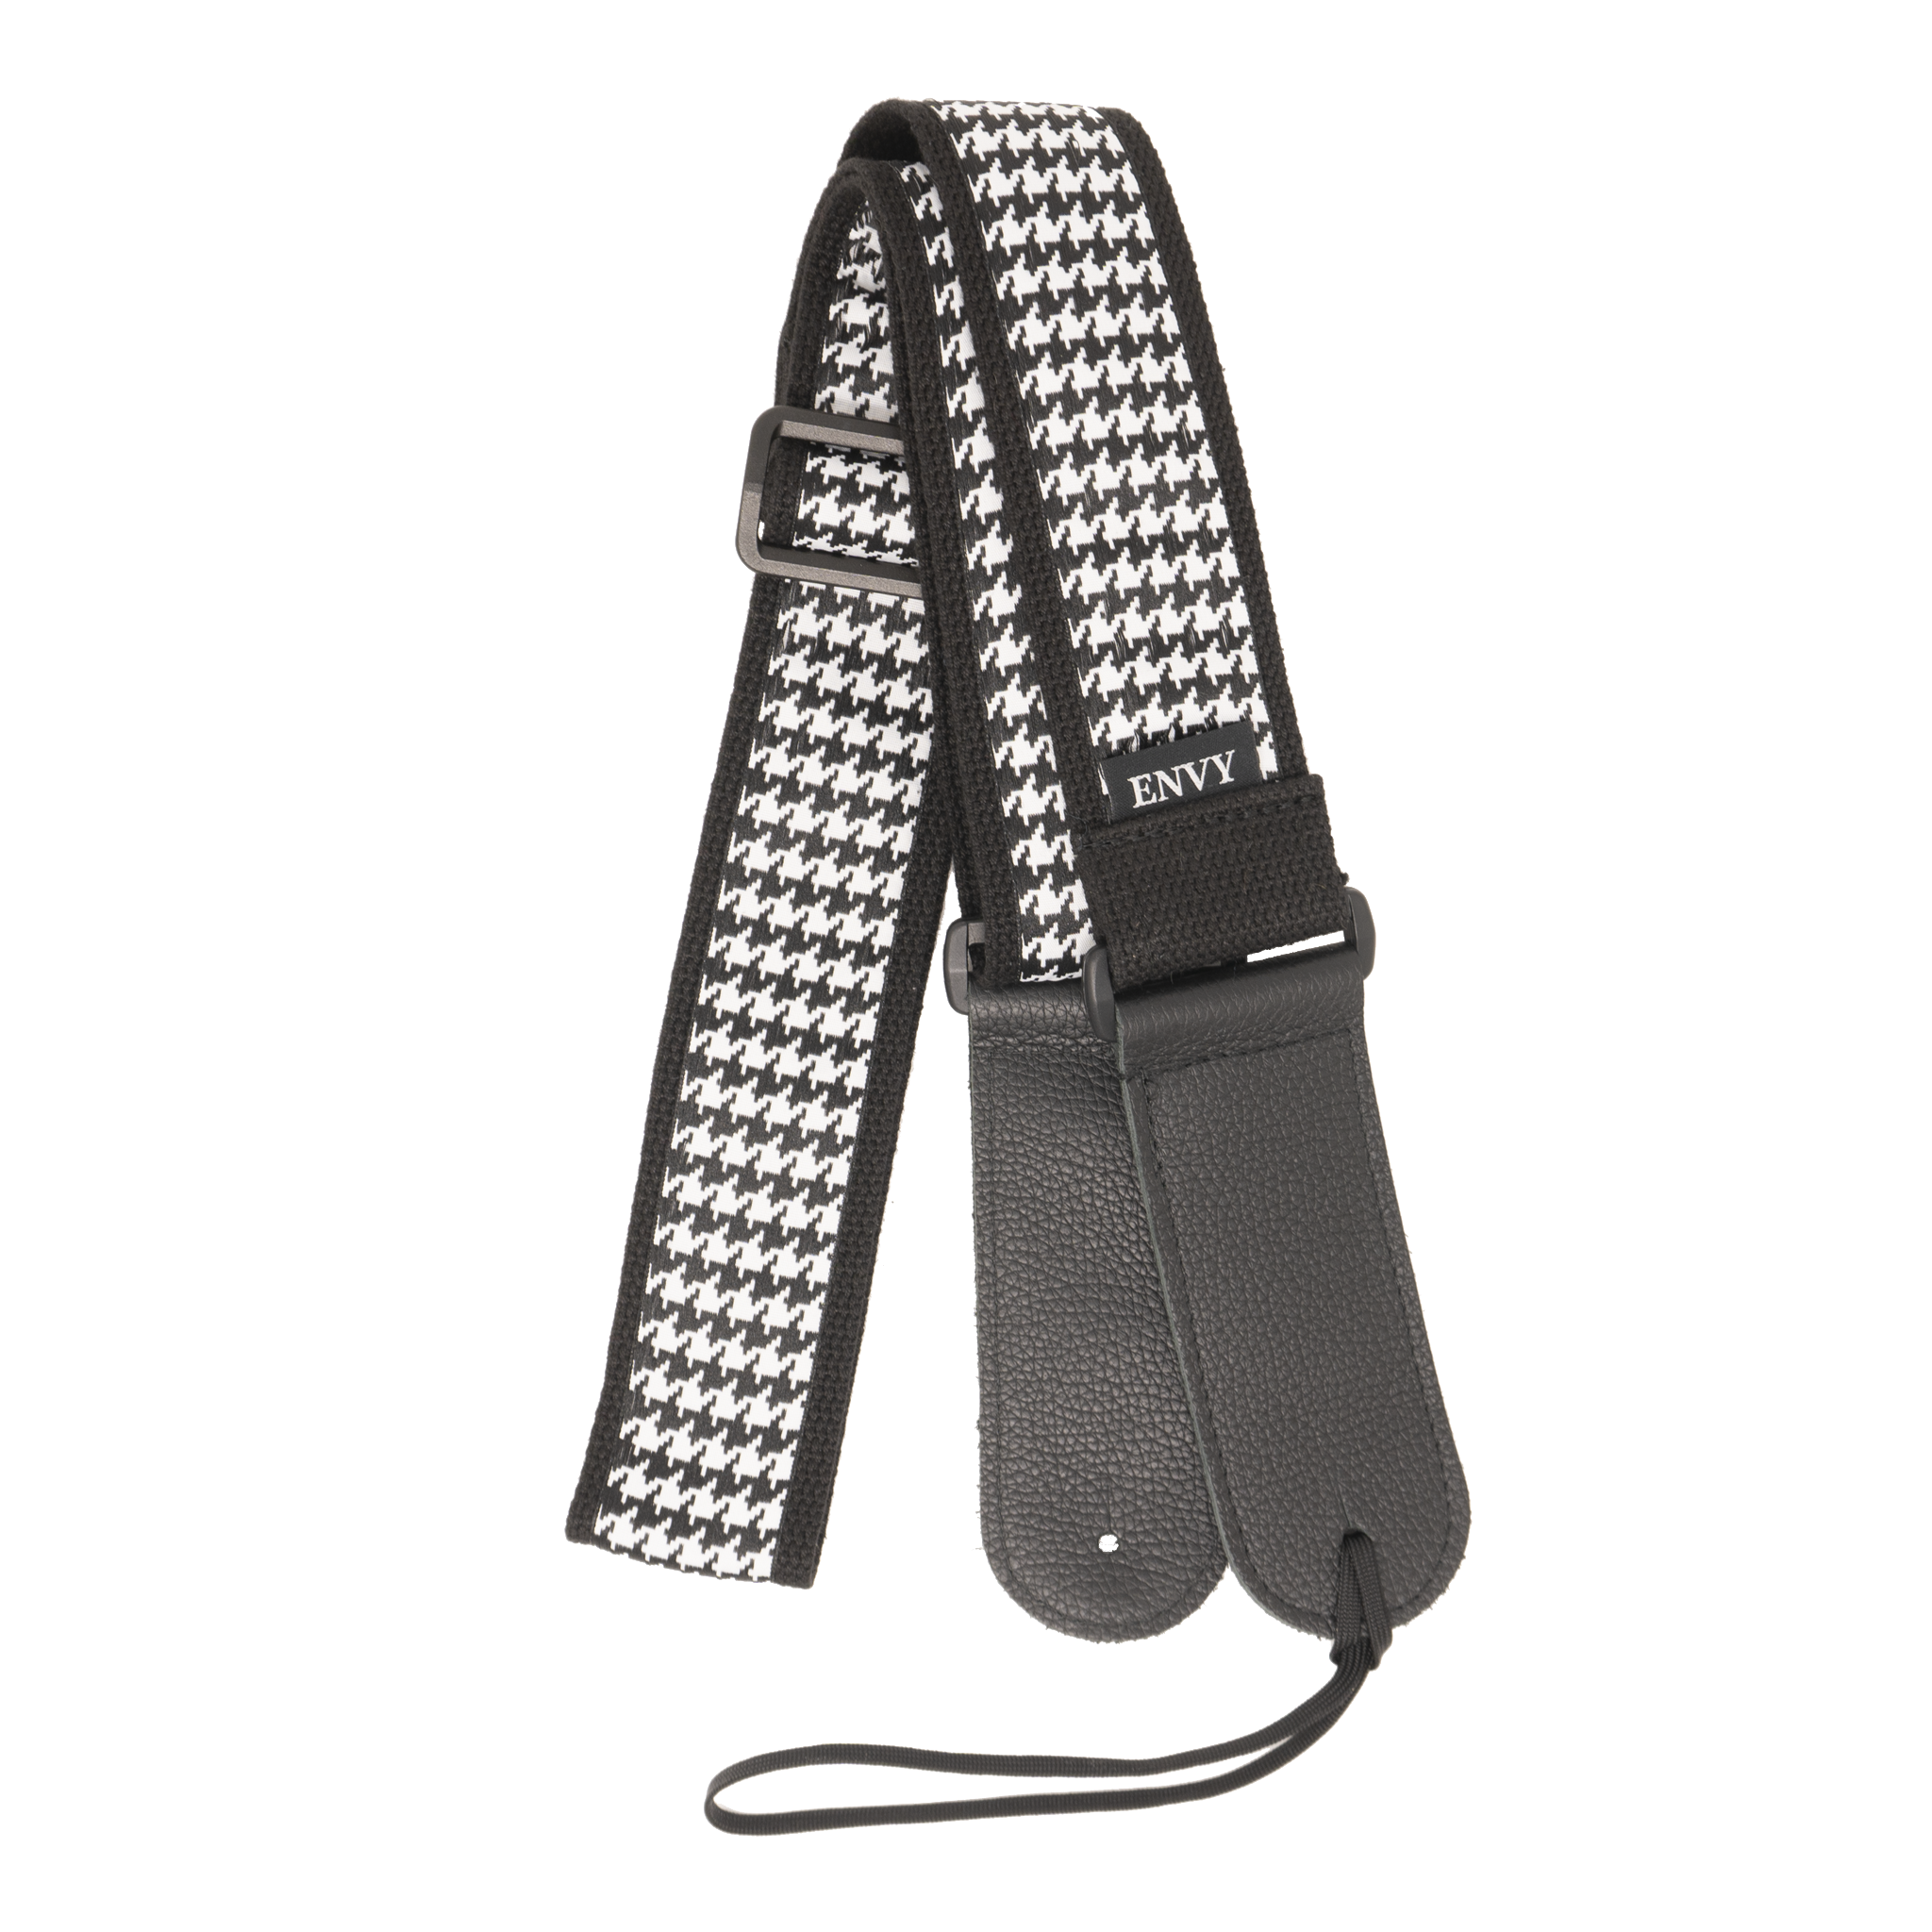 My Fave Guitar Strap in Black and White Houndstooth